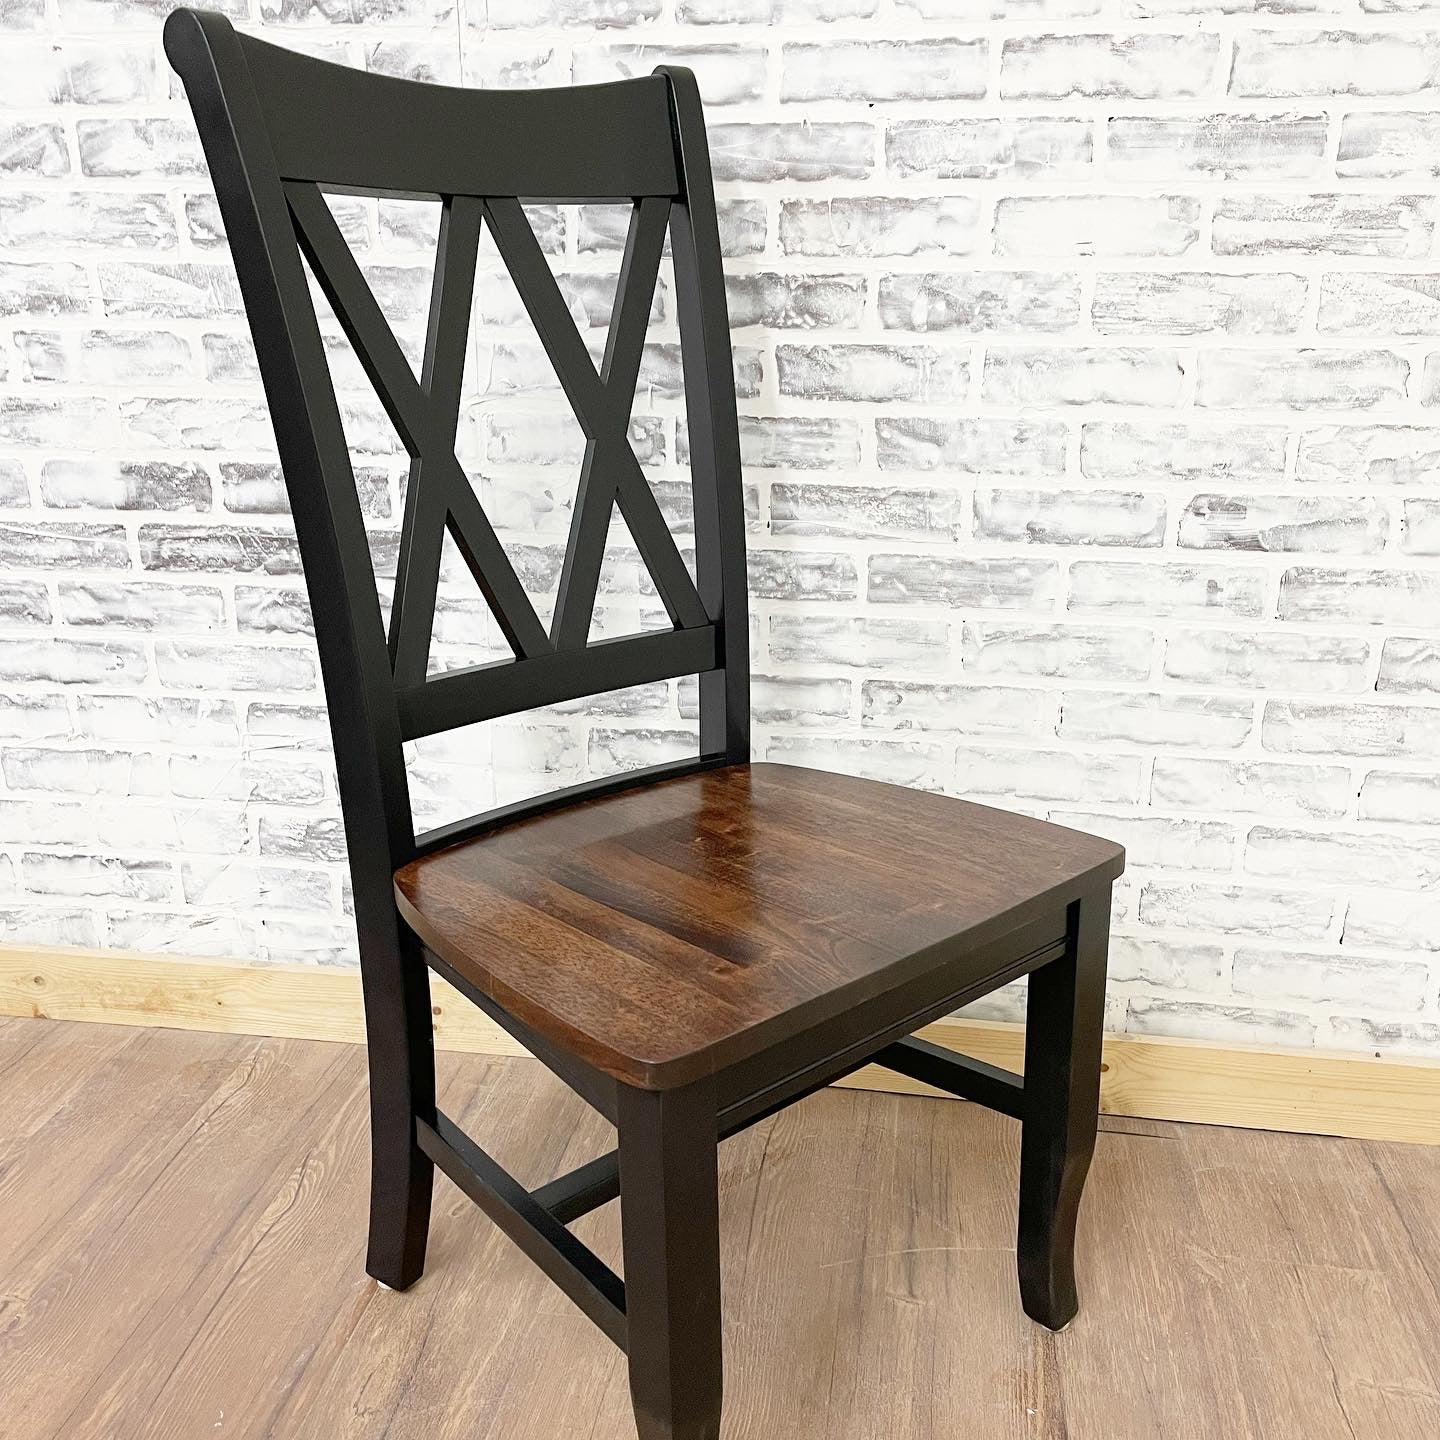 Rustic Walnut Wood Cross-Back Commercial Use Chair